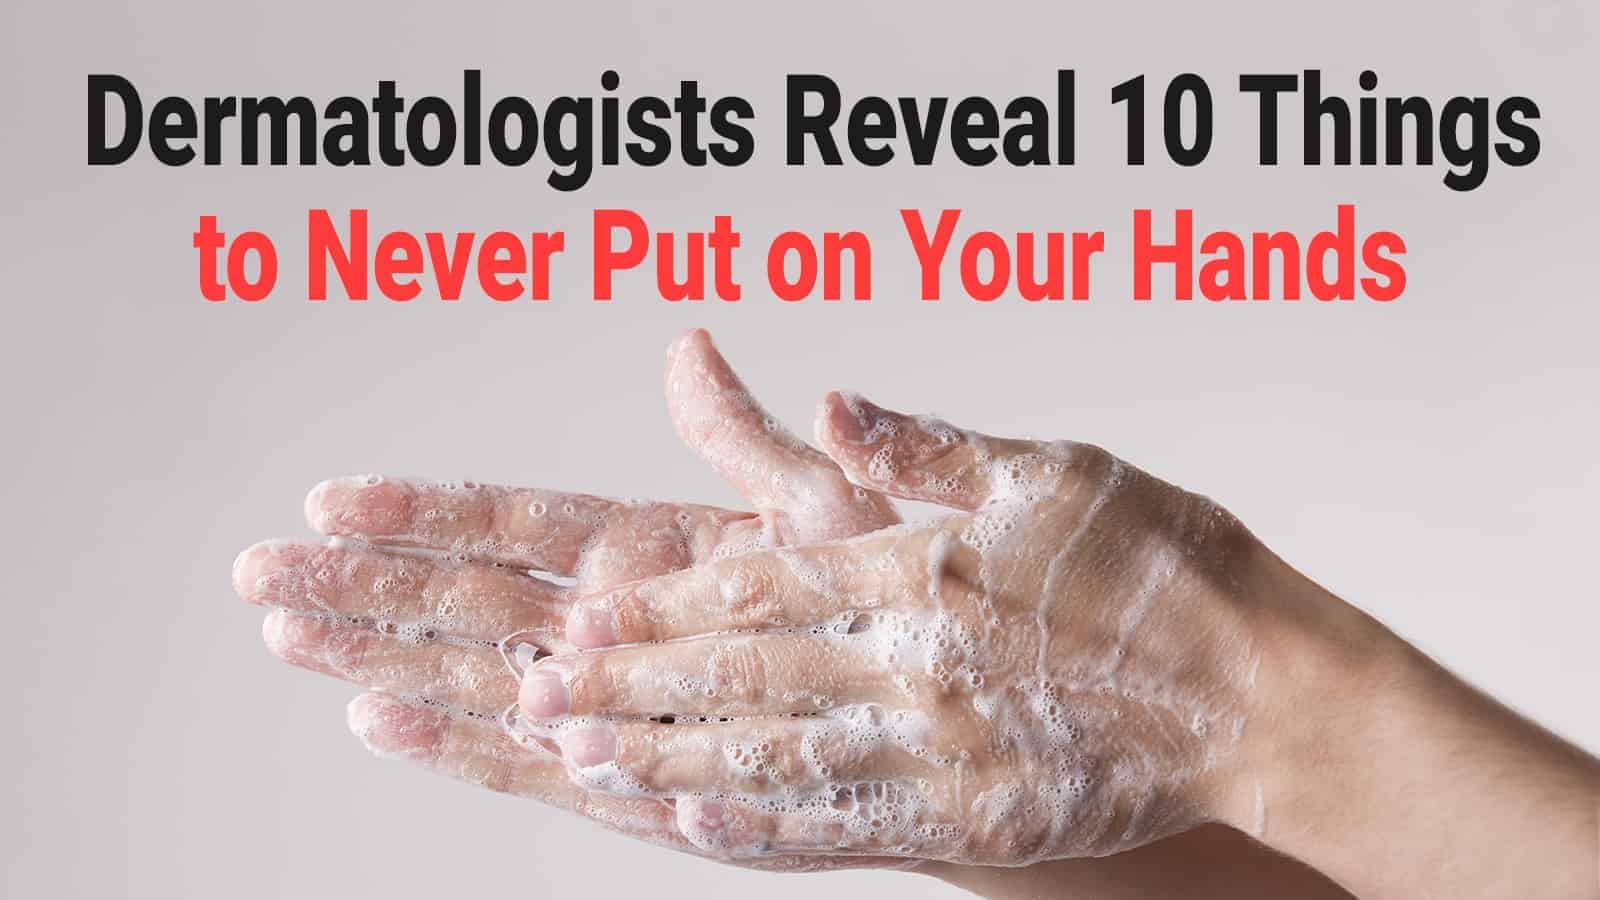 Dermatologists Reveal 10 Things to Never Put on Your Hands